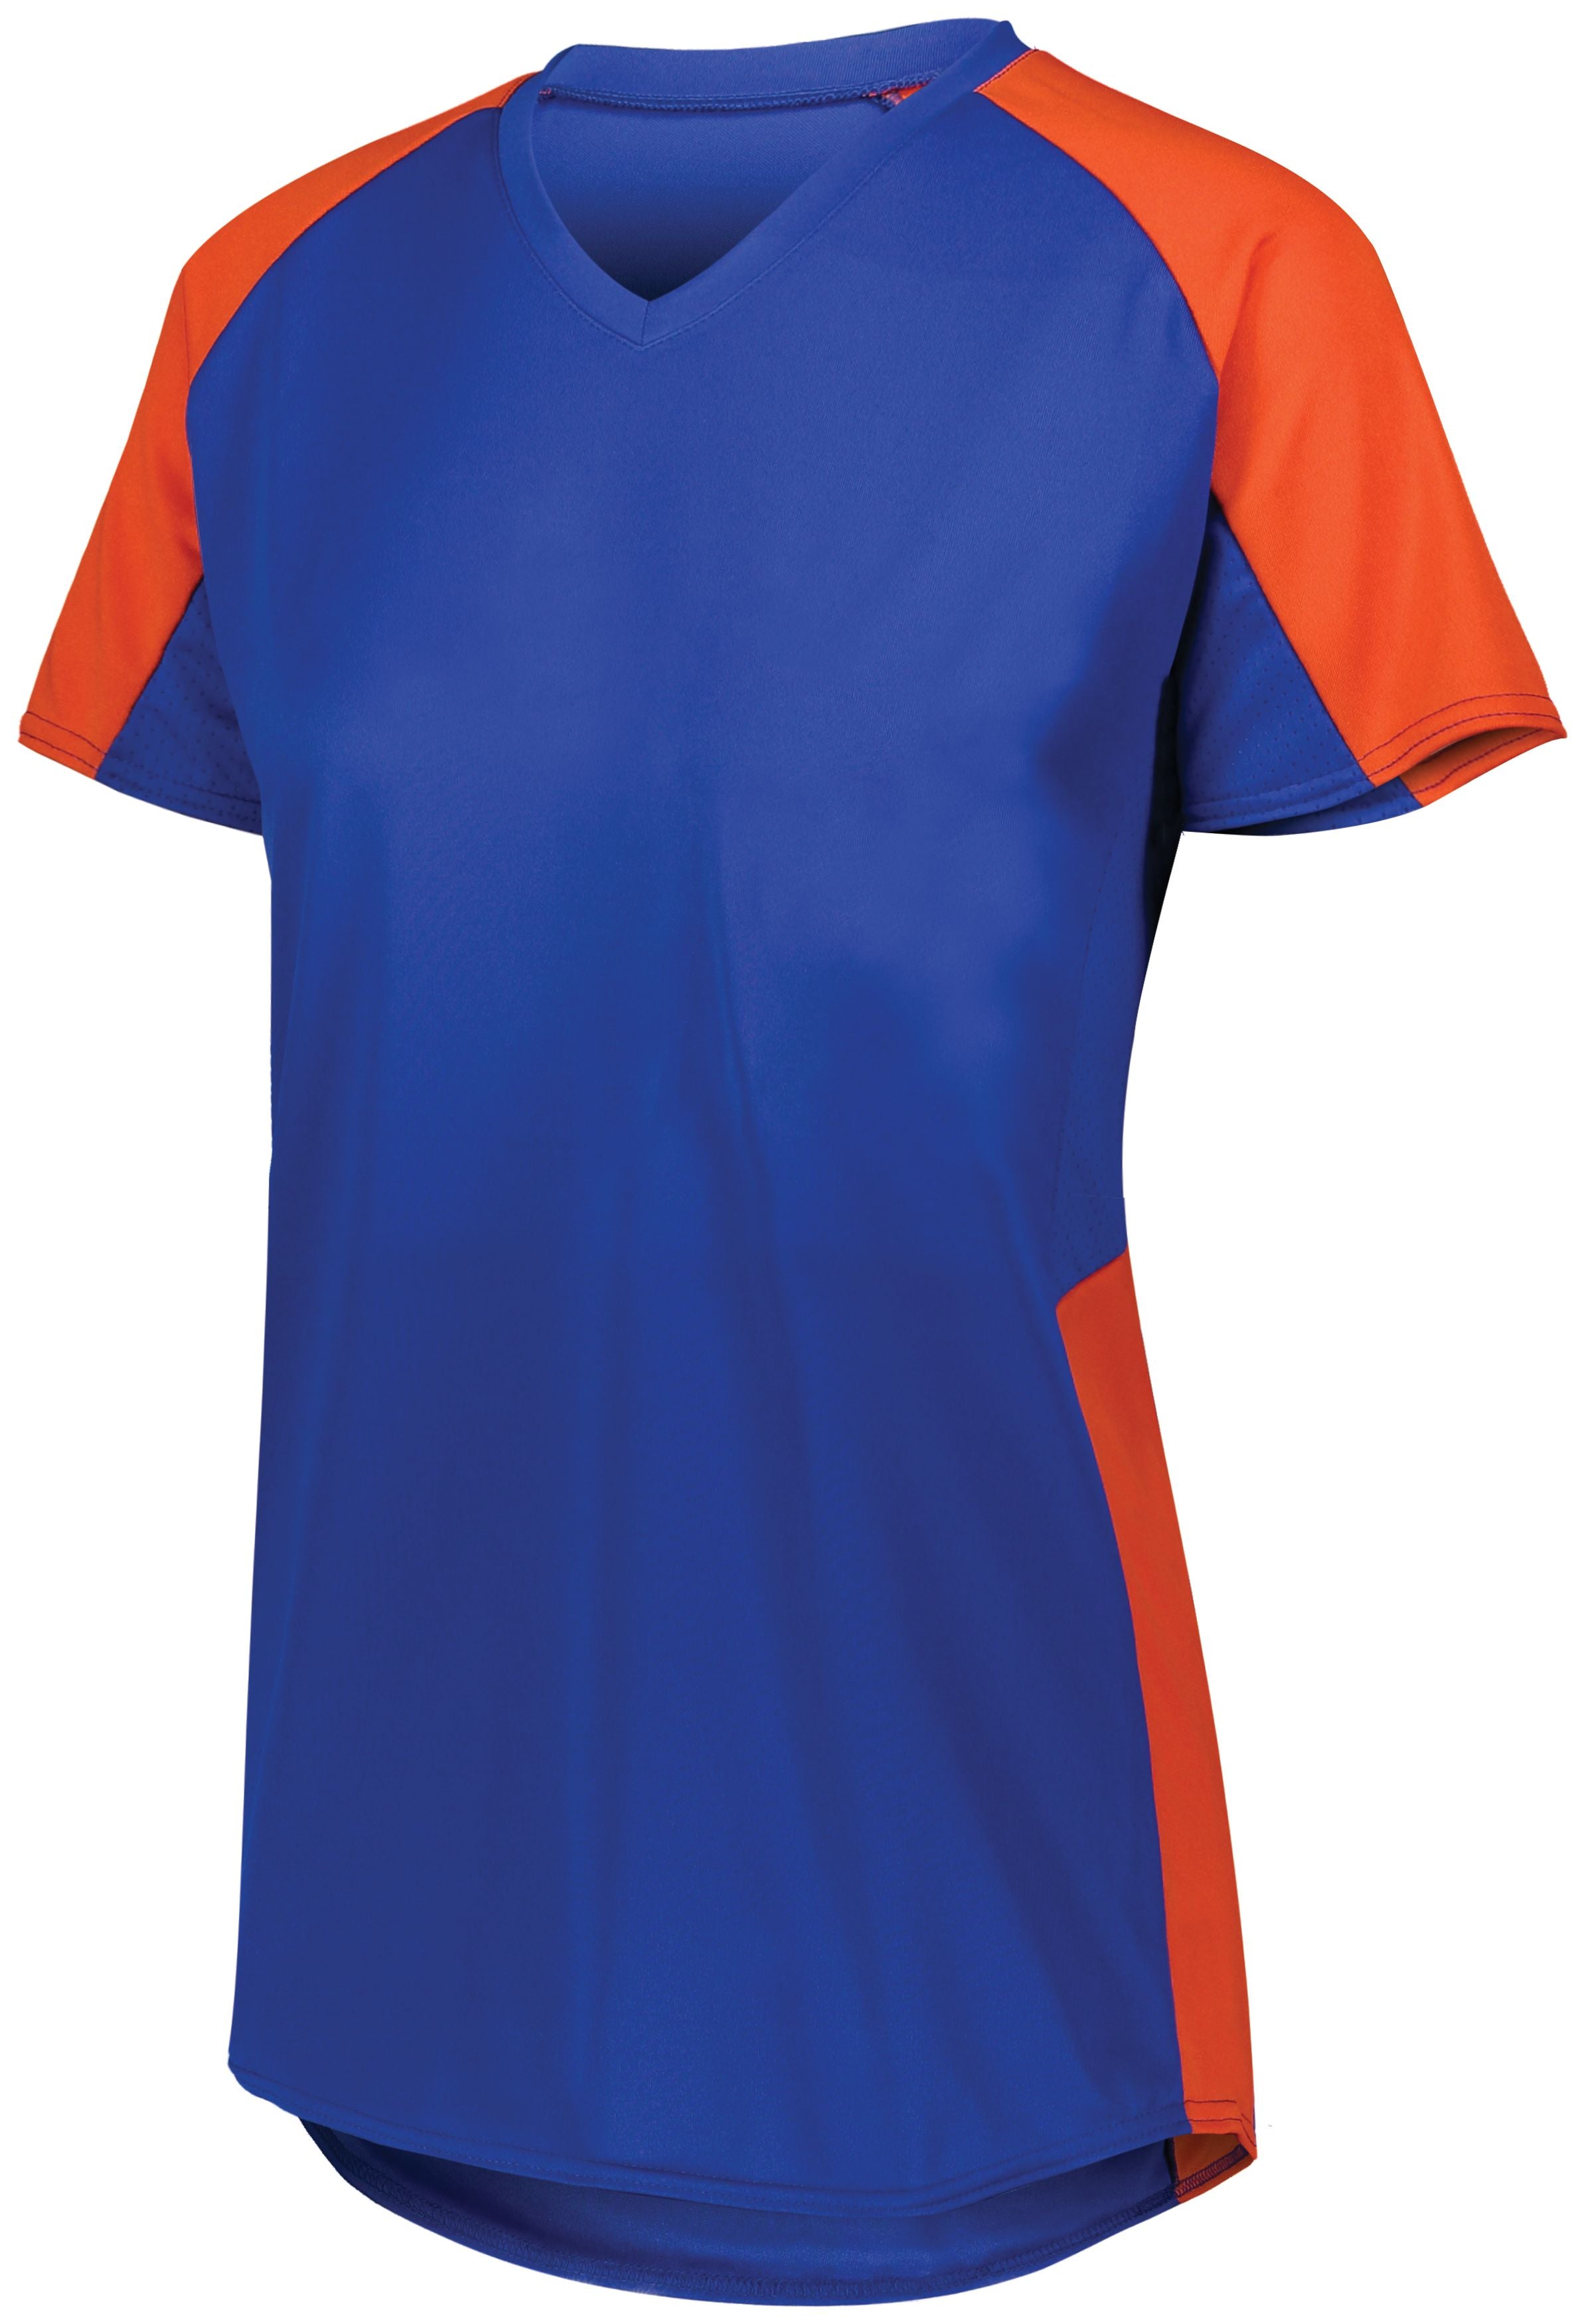 Augusta Sportswear Girls Cutter Jersey in Royal/Orange  -Part of the Girls, Augusta-Products, Softball, Girls-Jersey, Shirts product lines at KanaleyCreations.com